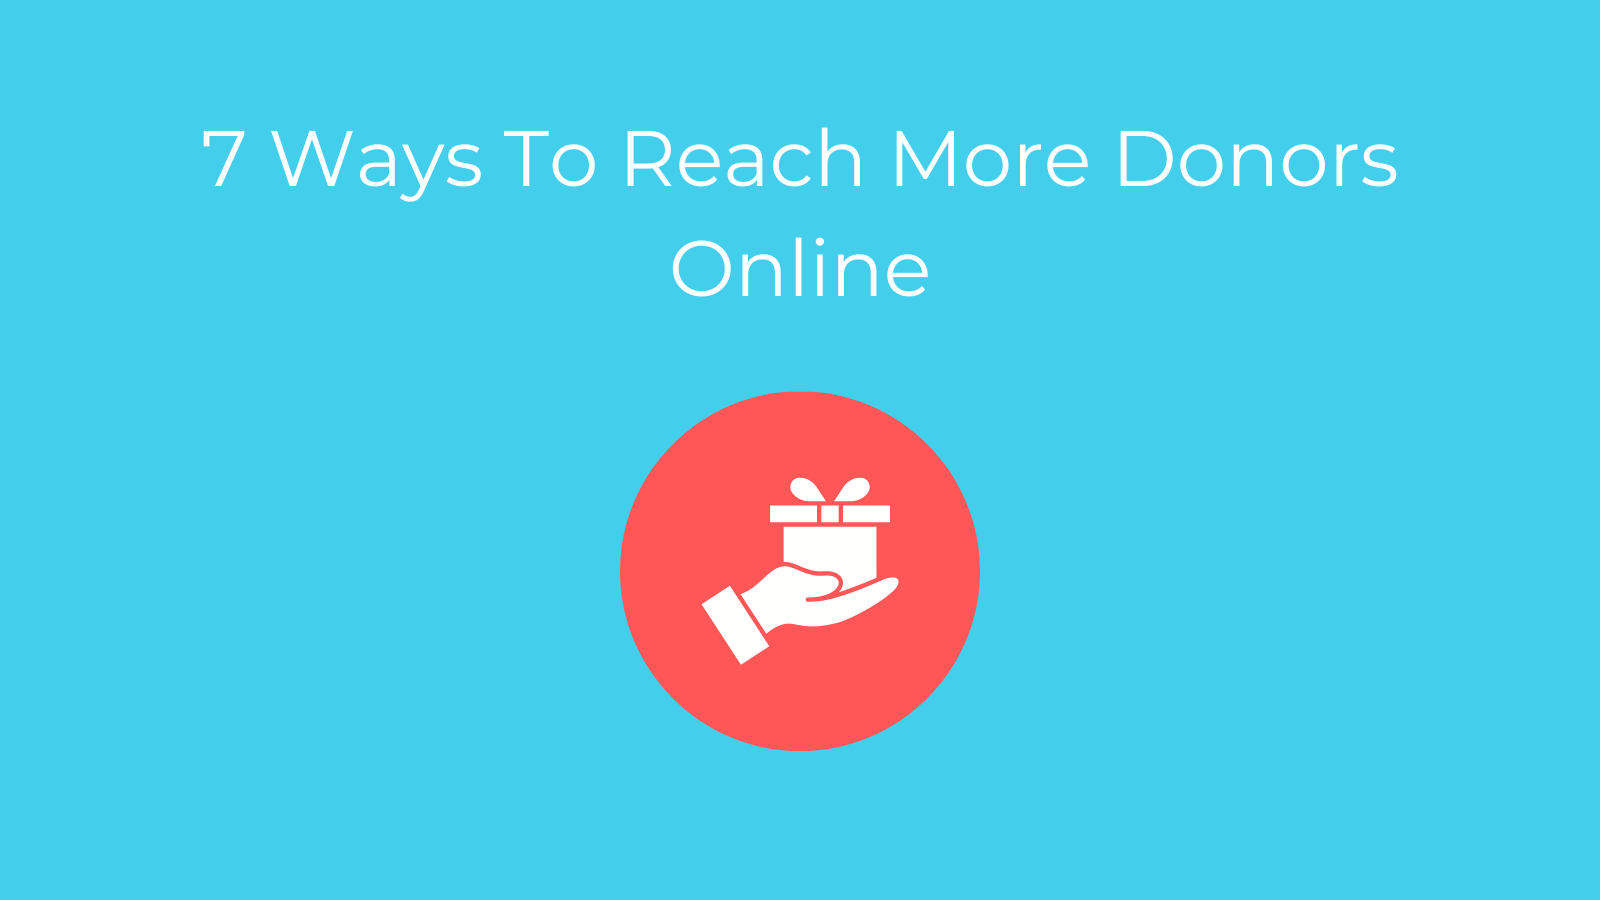 7 Ways To Reach More Donors Online